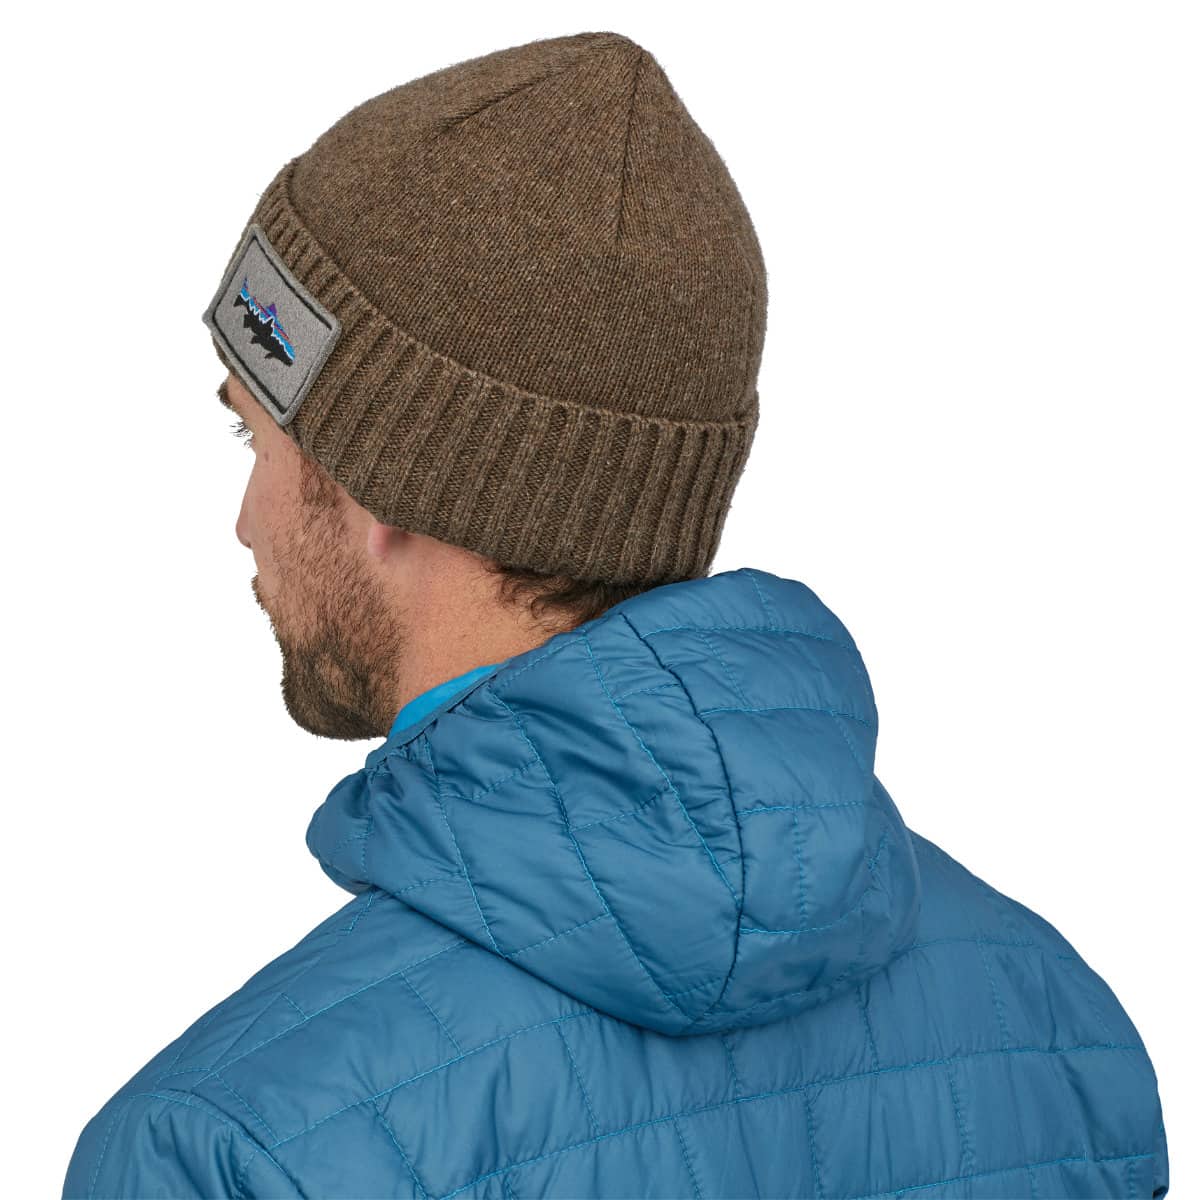 Patagonia Brodeo Beanie - Fitz Roy Trout Patch: Ash Tan